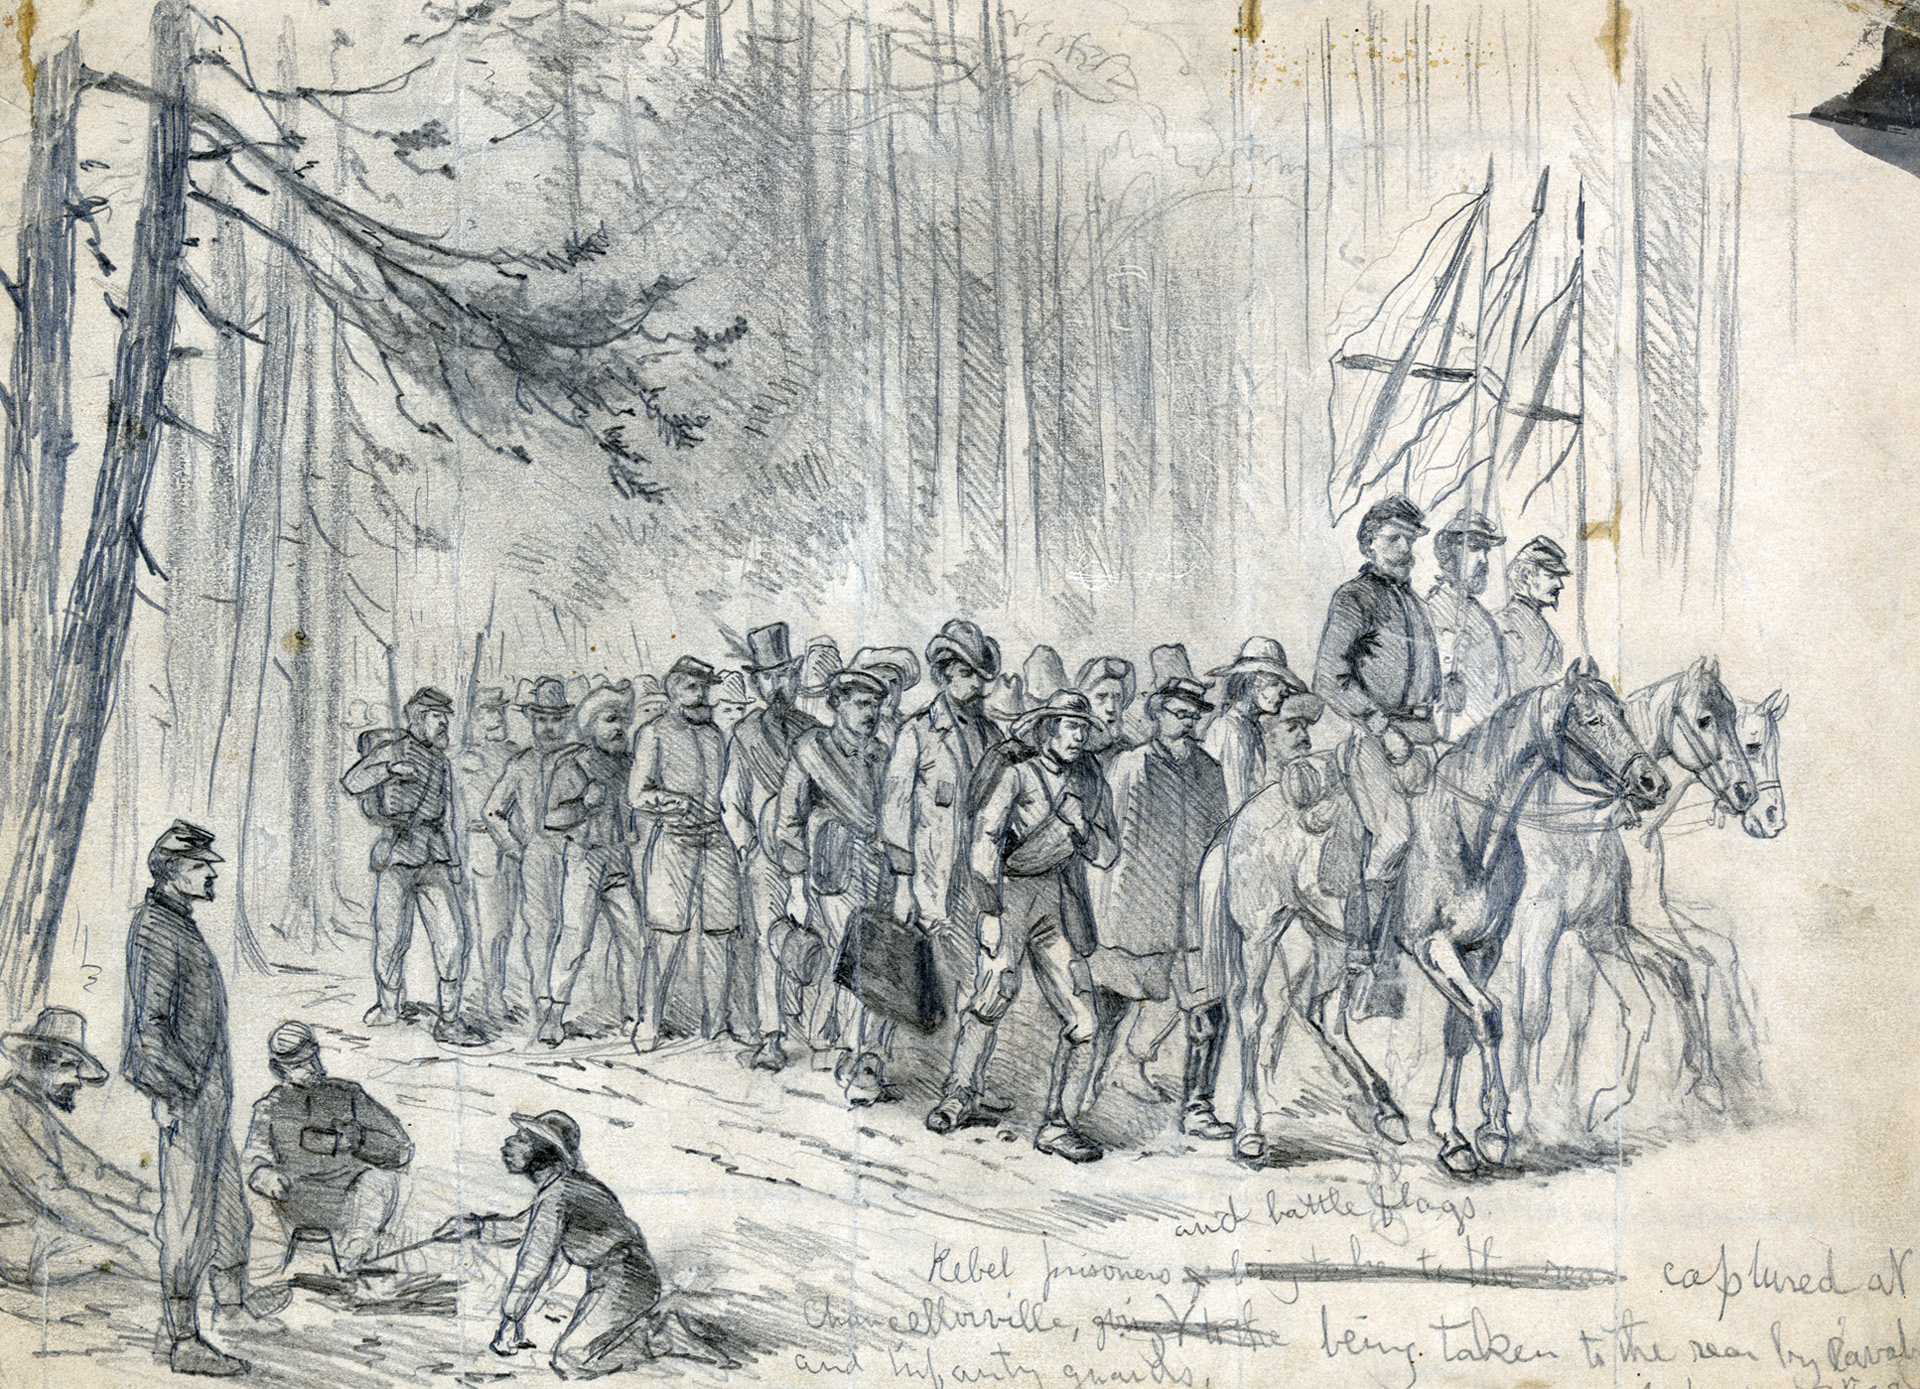 Confederate prisoners are shown at Chancellorsville. Sharpe negotiated the exchange of 4,000 Union prisoners after the May 1863 battle.